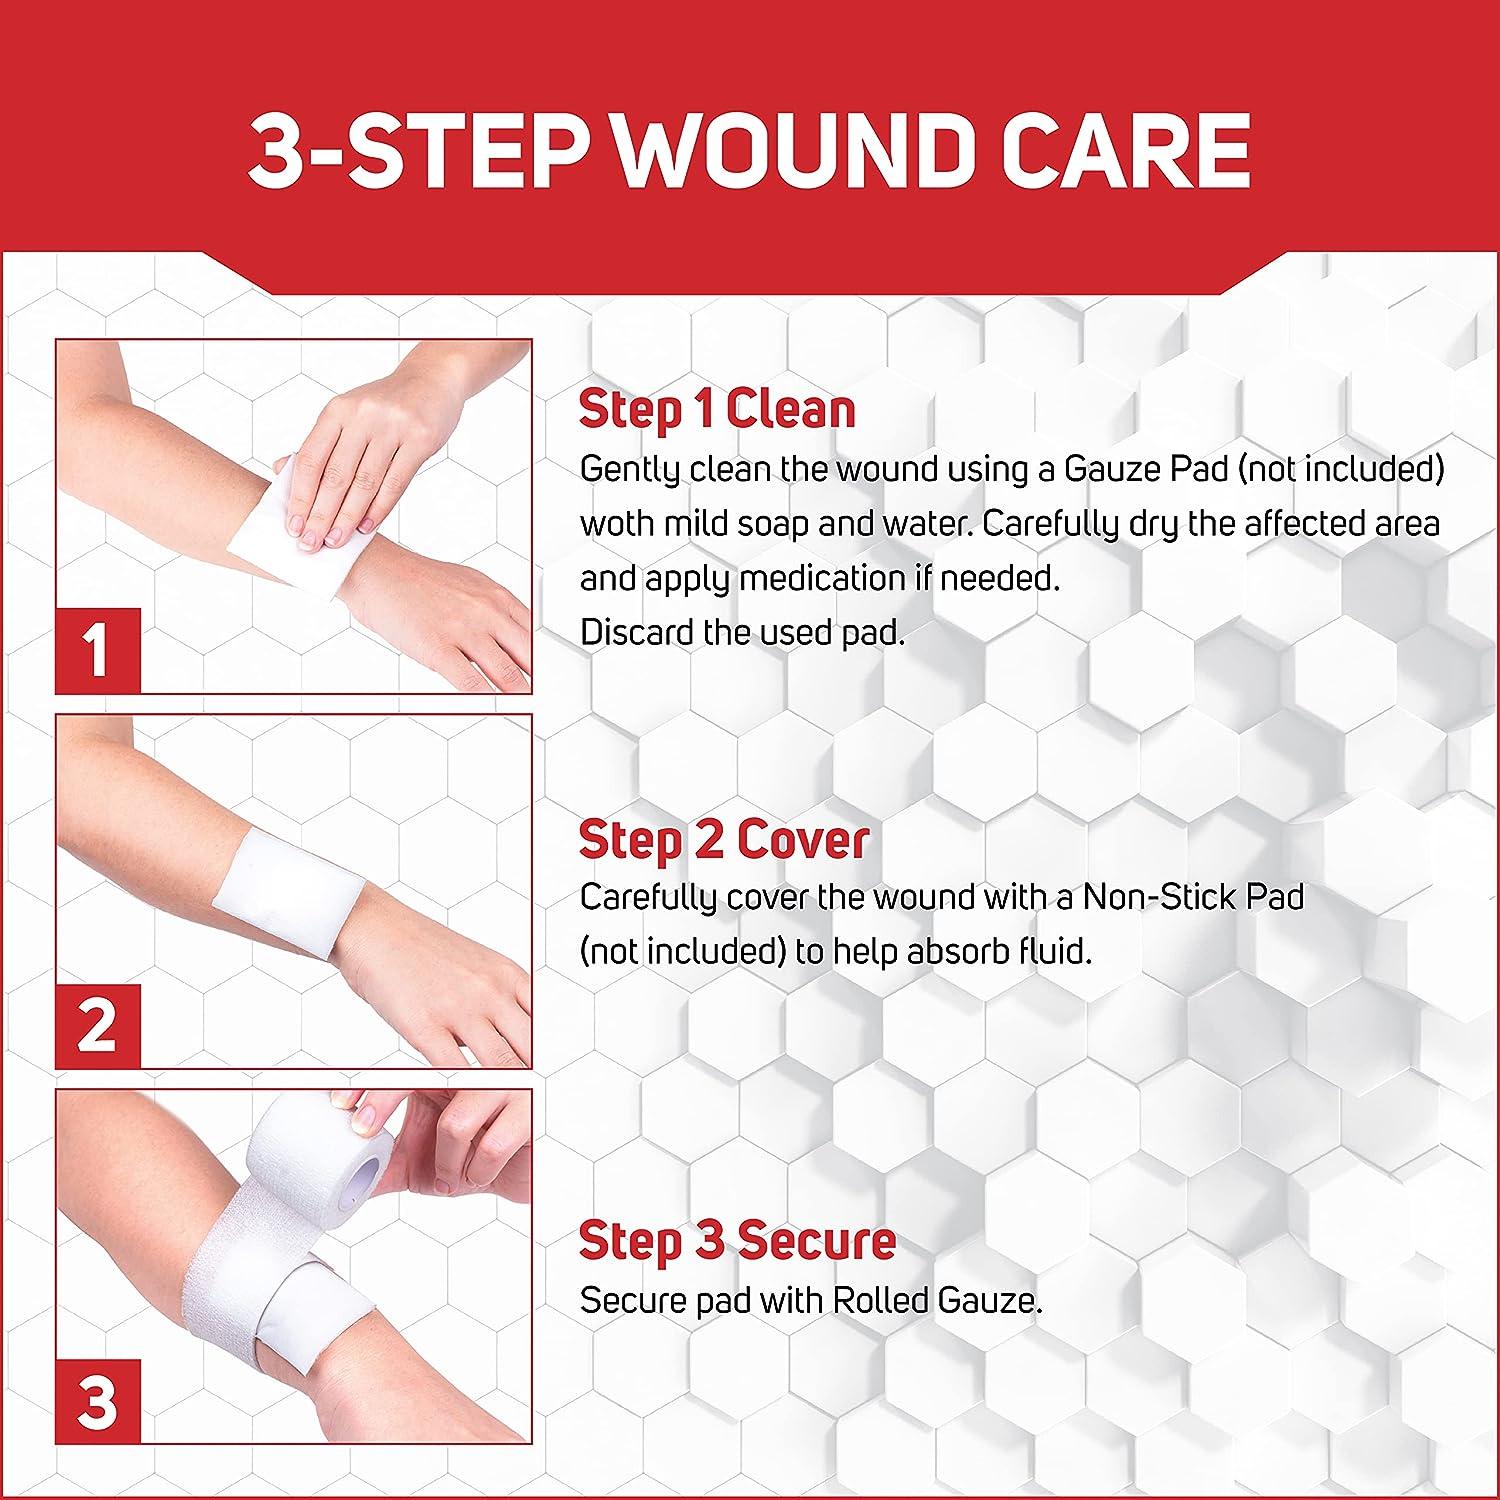 Basic steps to wound healing at home